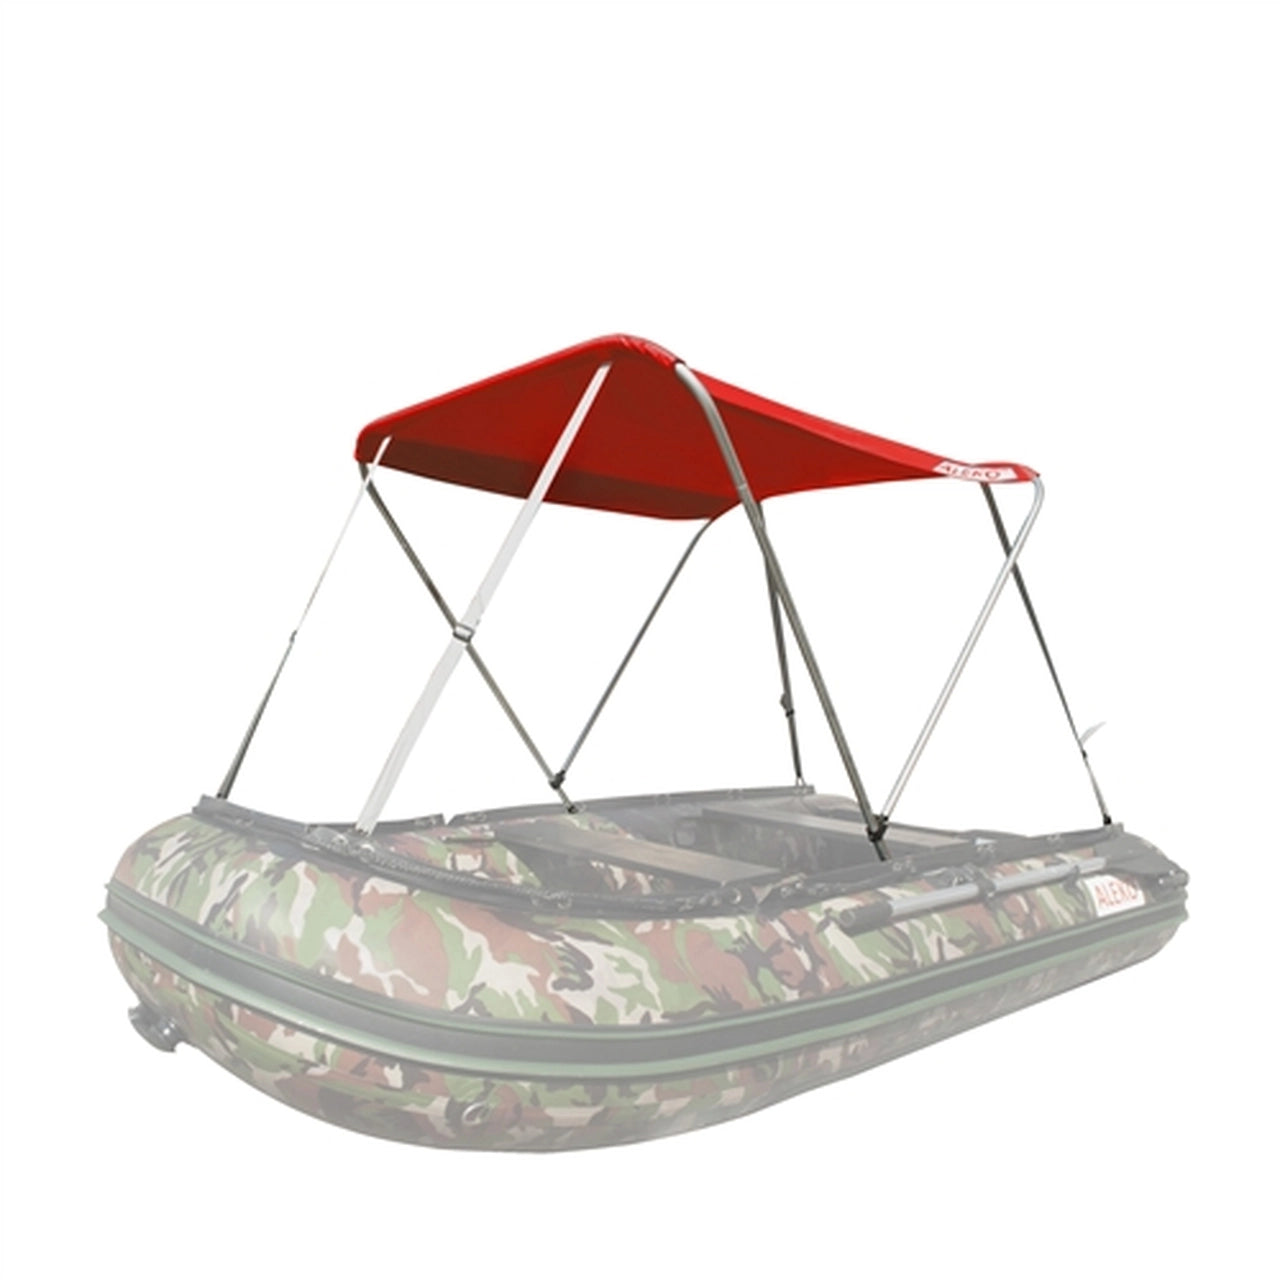 Aleko Boats Summer Canopy Tent for Inflatable Boats 12.5 ft